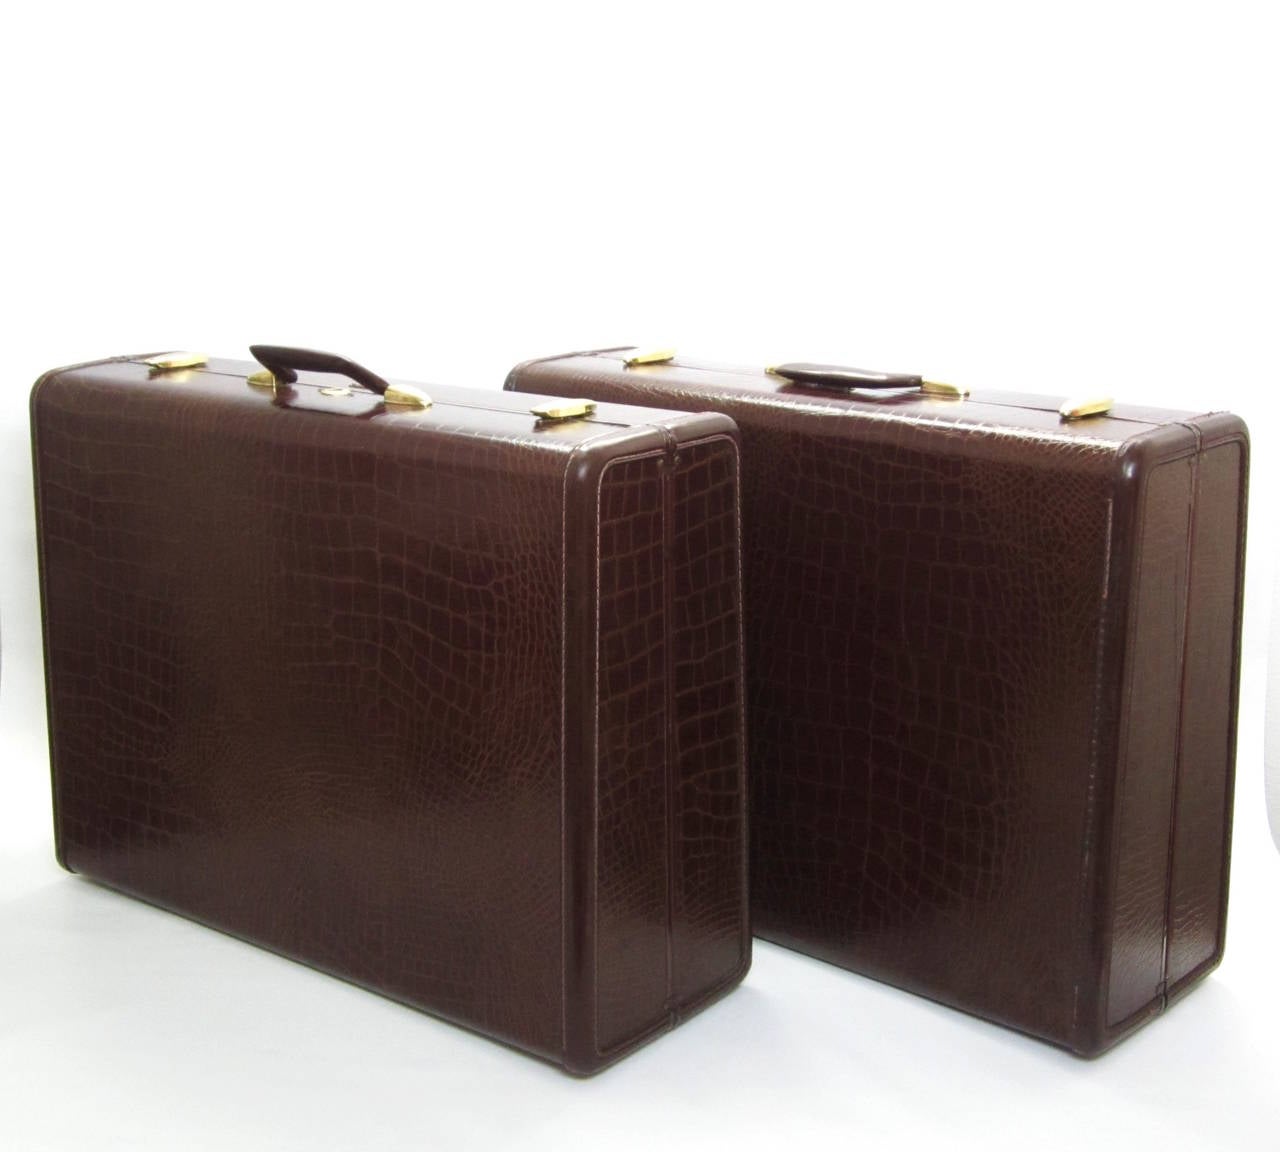 Pair of Crocodile-Embossed Leather Suitcases In Good Condition For Sale In Miami, FL